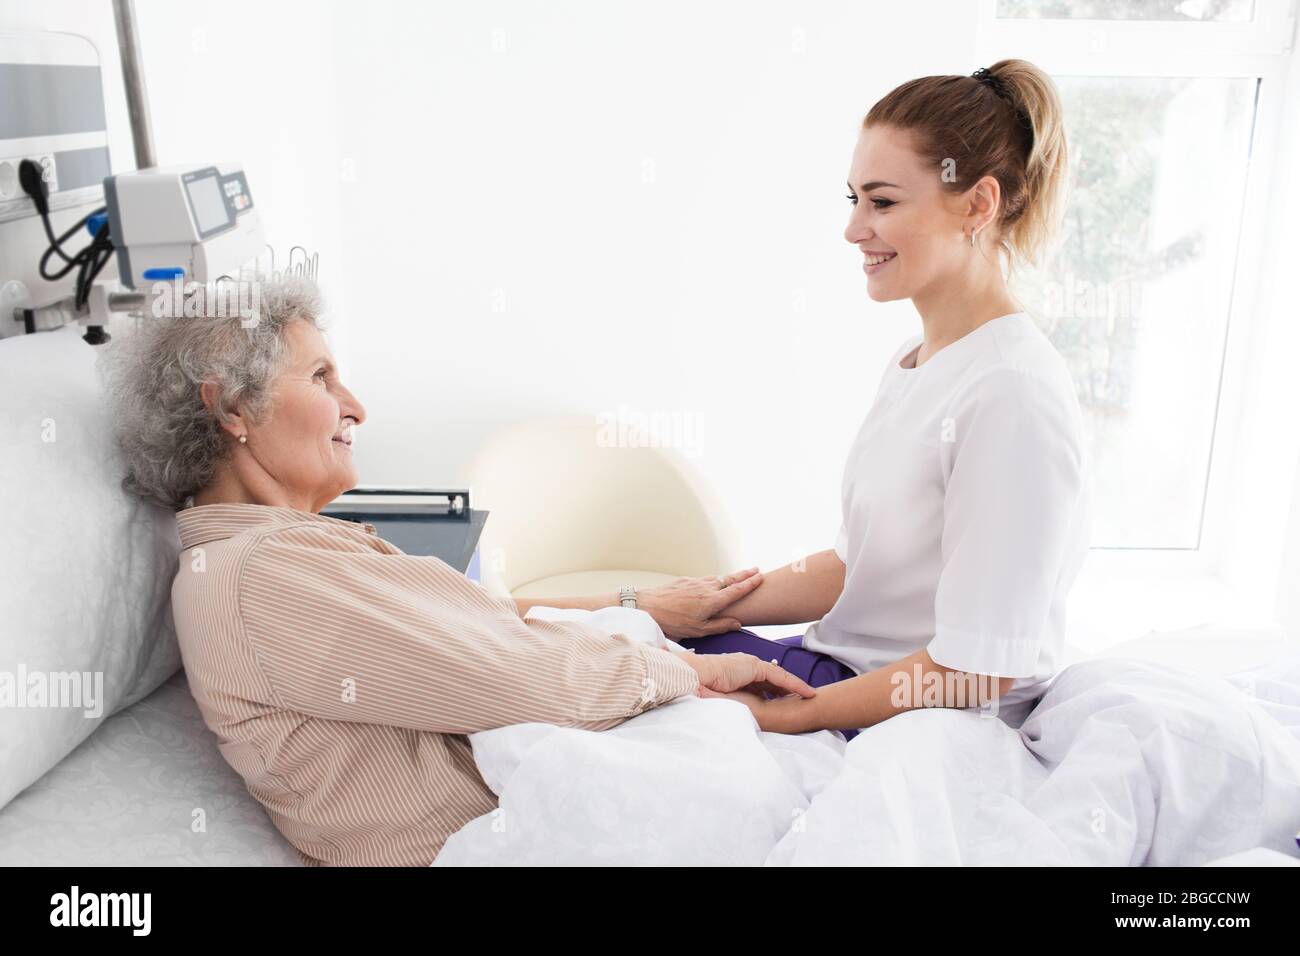 Woman with Alzheimer's disease lying in bed receives nurse care. Treating and caring for the elderly with Alzheimer's disease Stock Photo